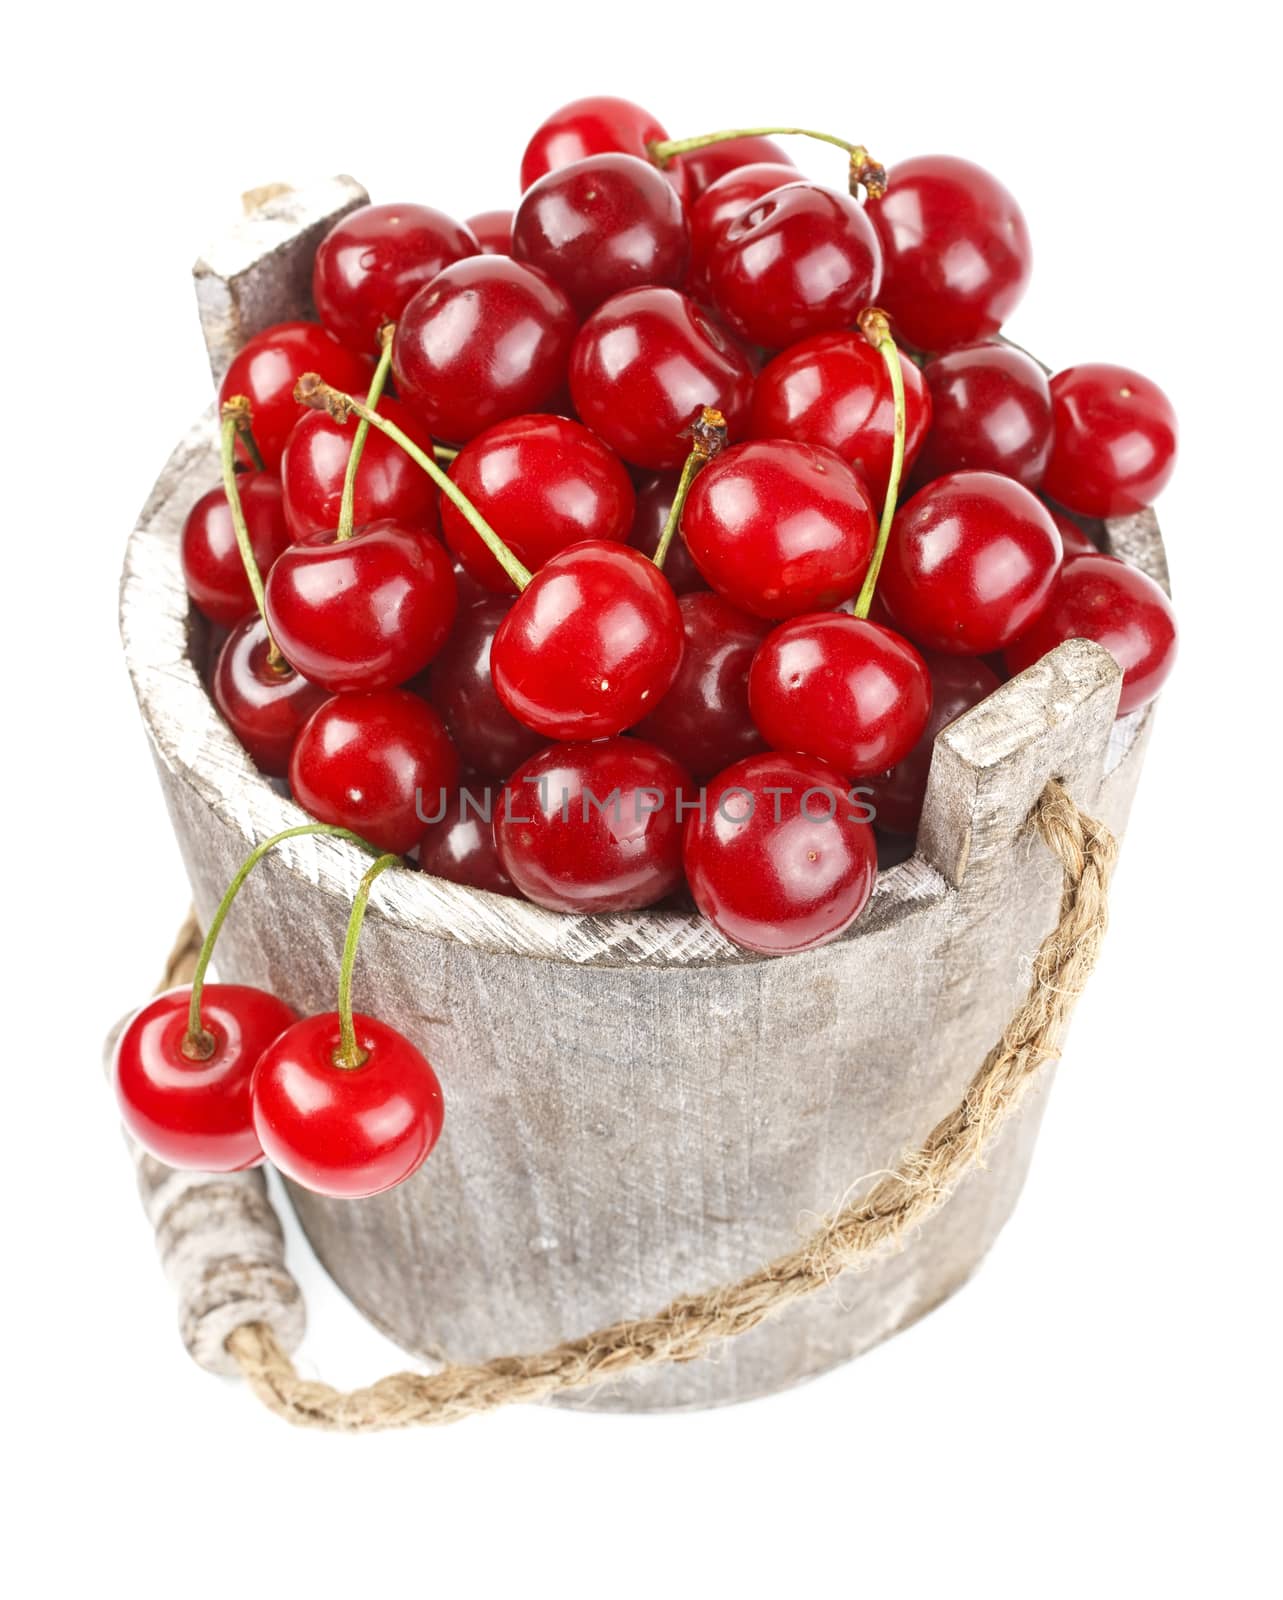 Fresh cherries with water drops in a wood bucket